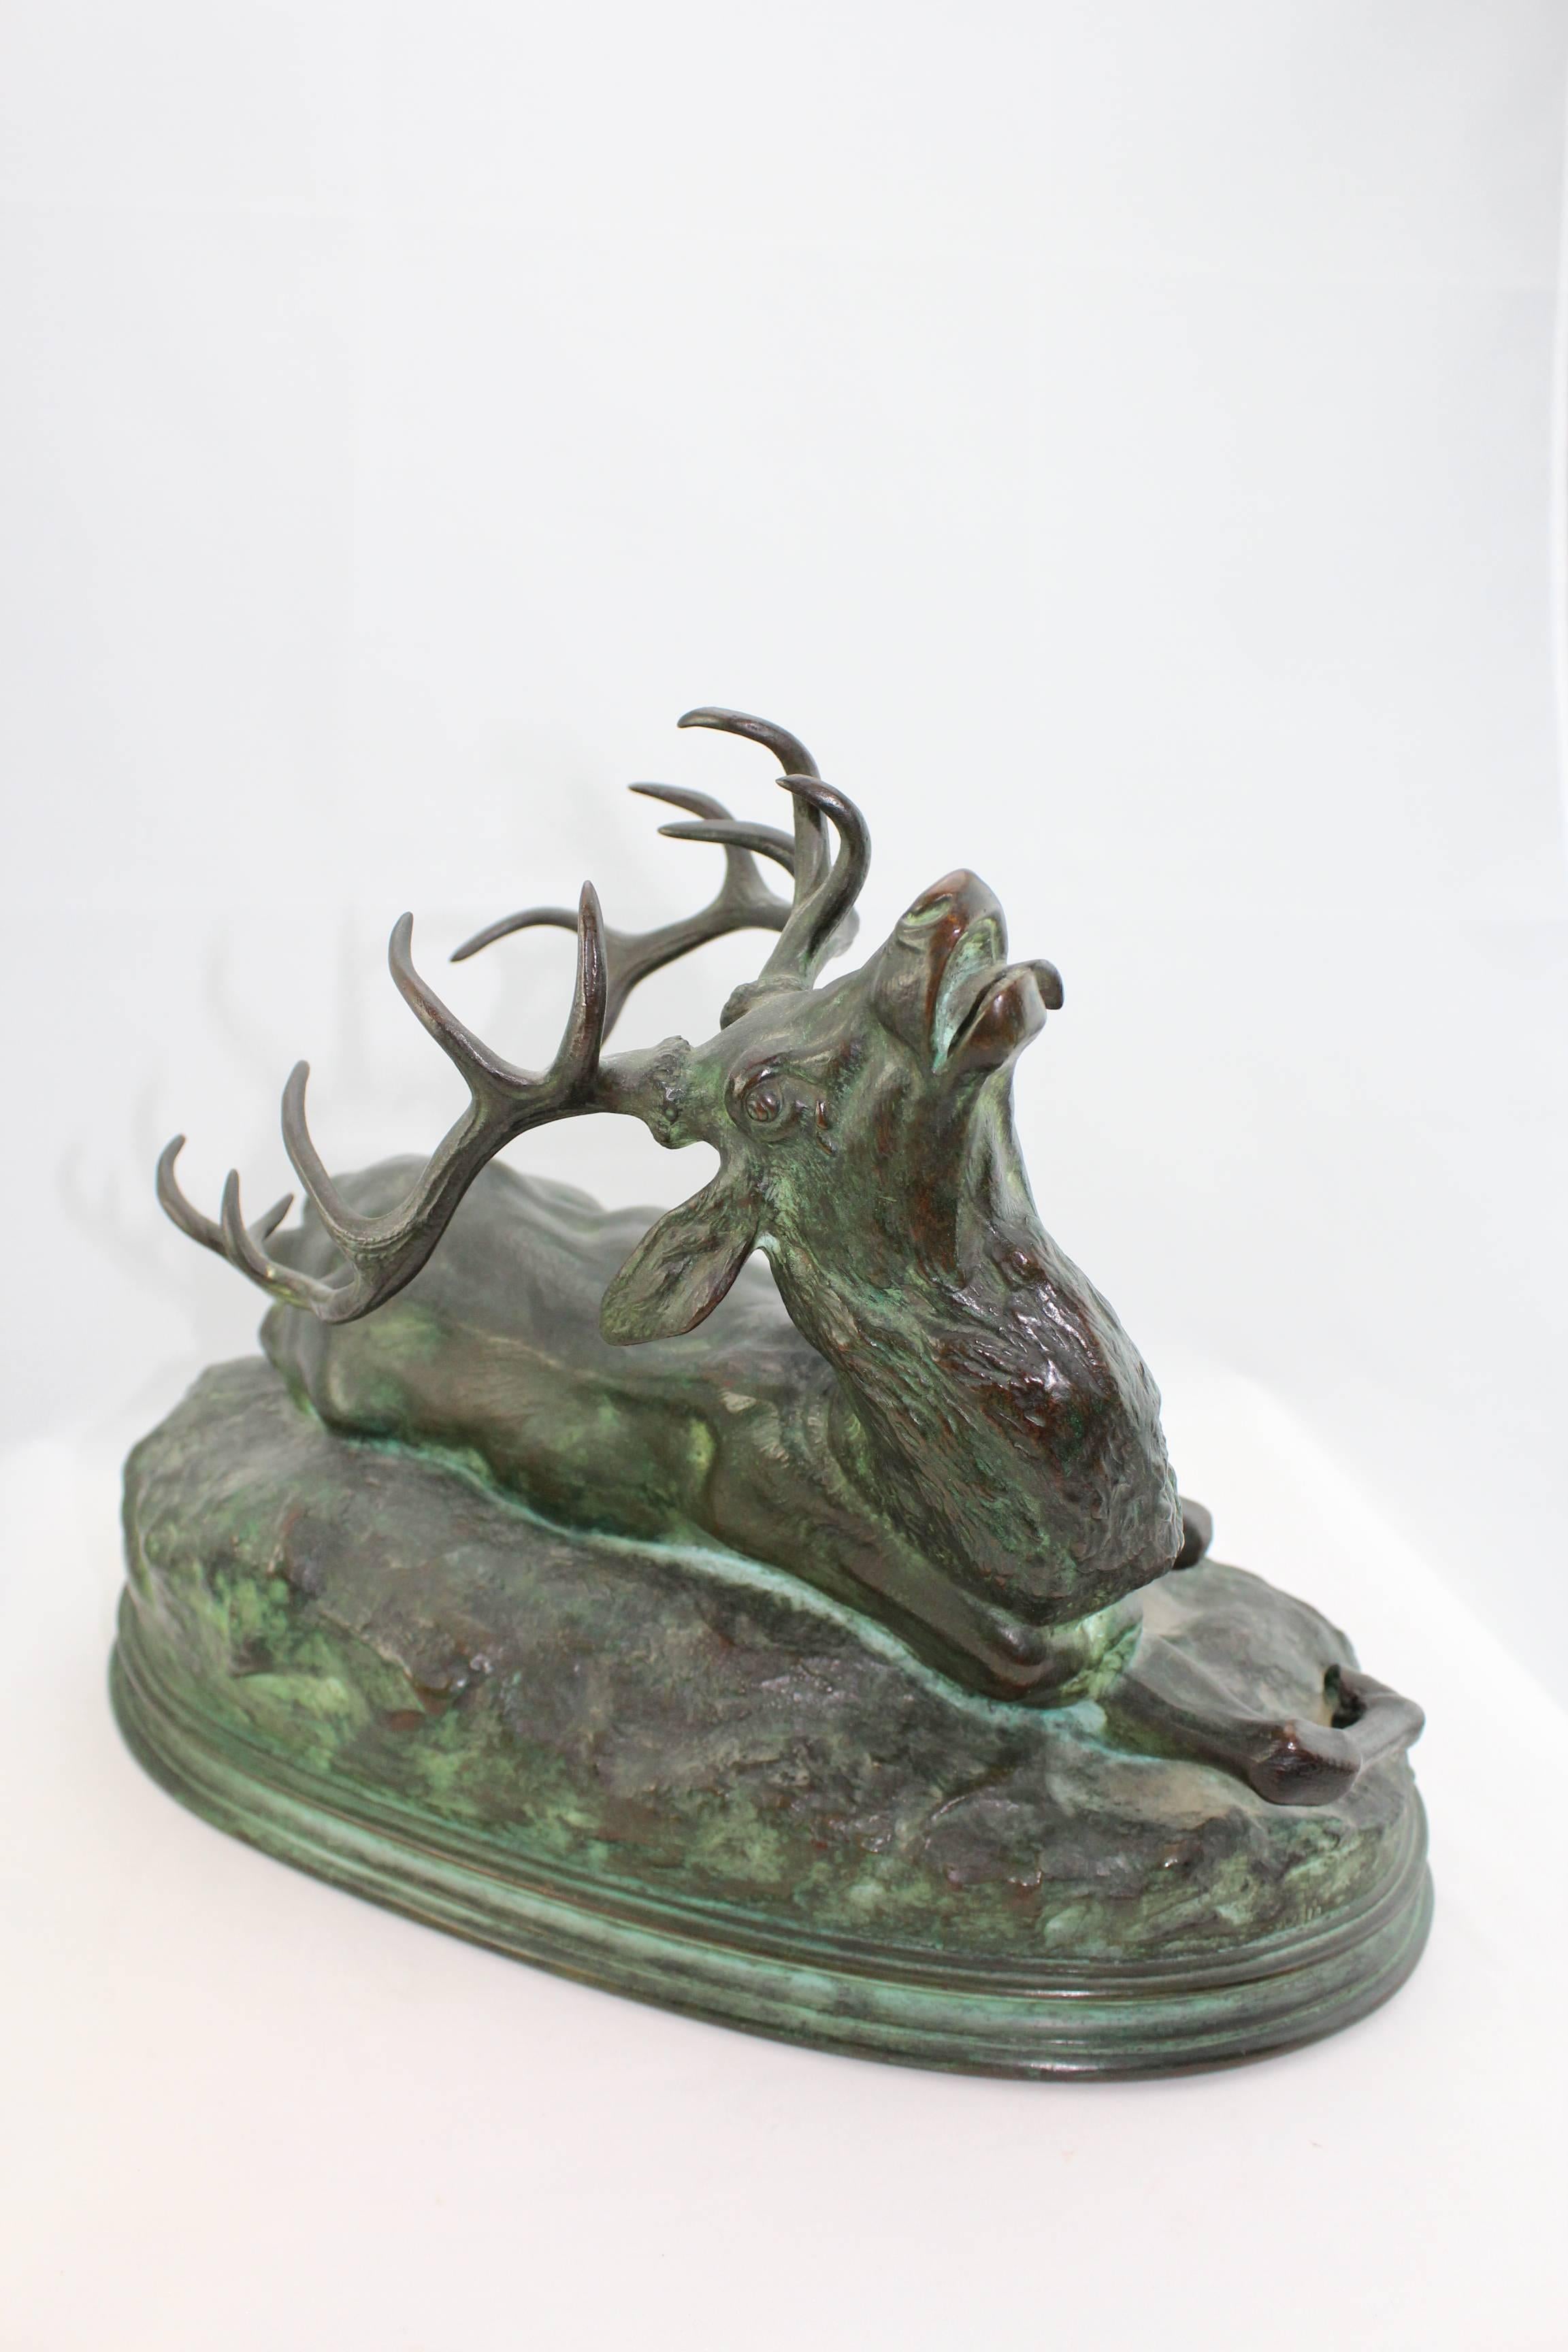 Cast Louis Vidal, Bronze of a Wounded Stag, Barye, circa 1863